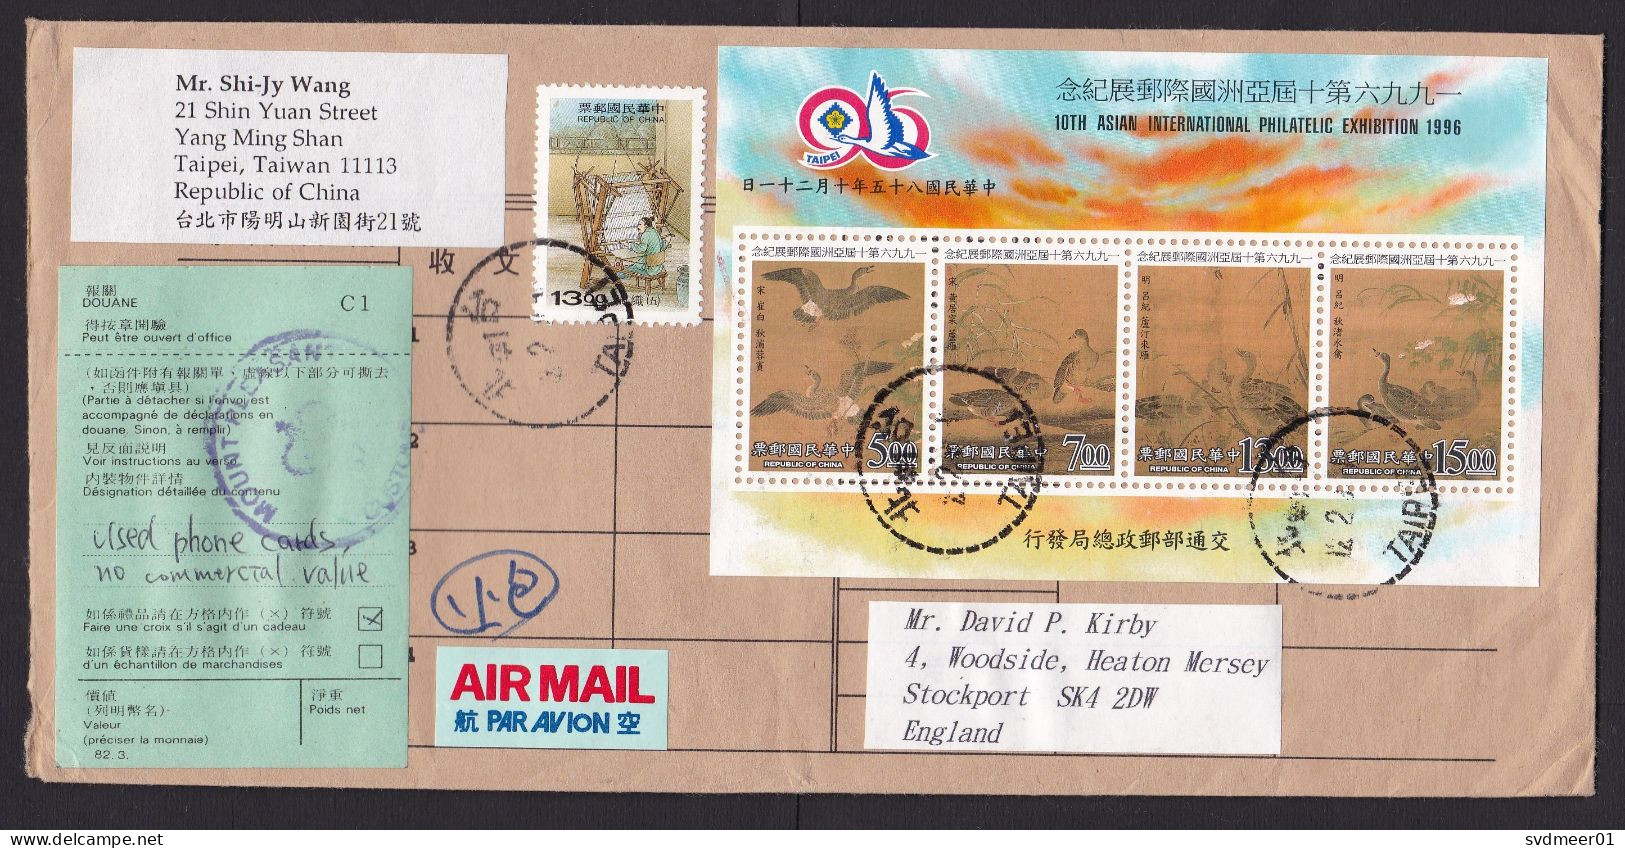 Taiwan: Airmail Cover To UK, 1996?, 5 Stamps, Souvenir Sheet, Bird, Exhibition, Loom, C1 Customs Label (traces Of Use) - Briefe U. Dokumente